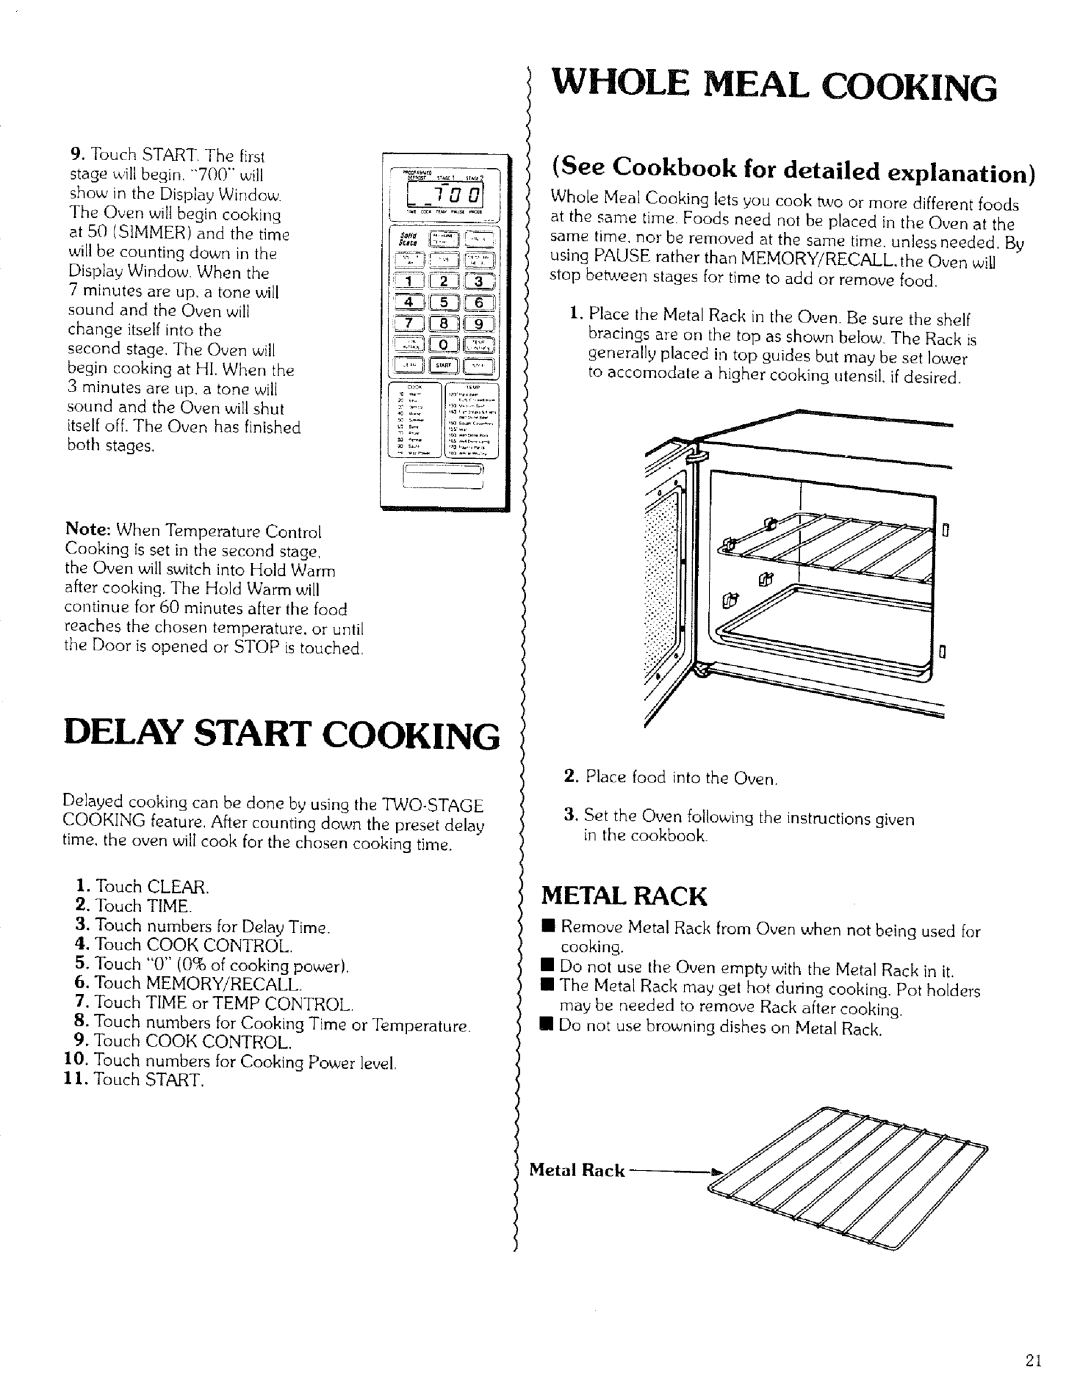 Kenmore 99721 manual Whole Meal Cooking, Delay Start Cooking, See Cookbook for detailed explanation, Metal Rack 